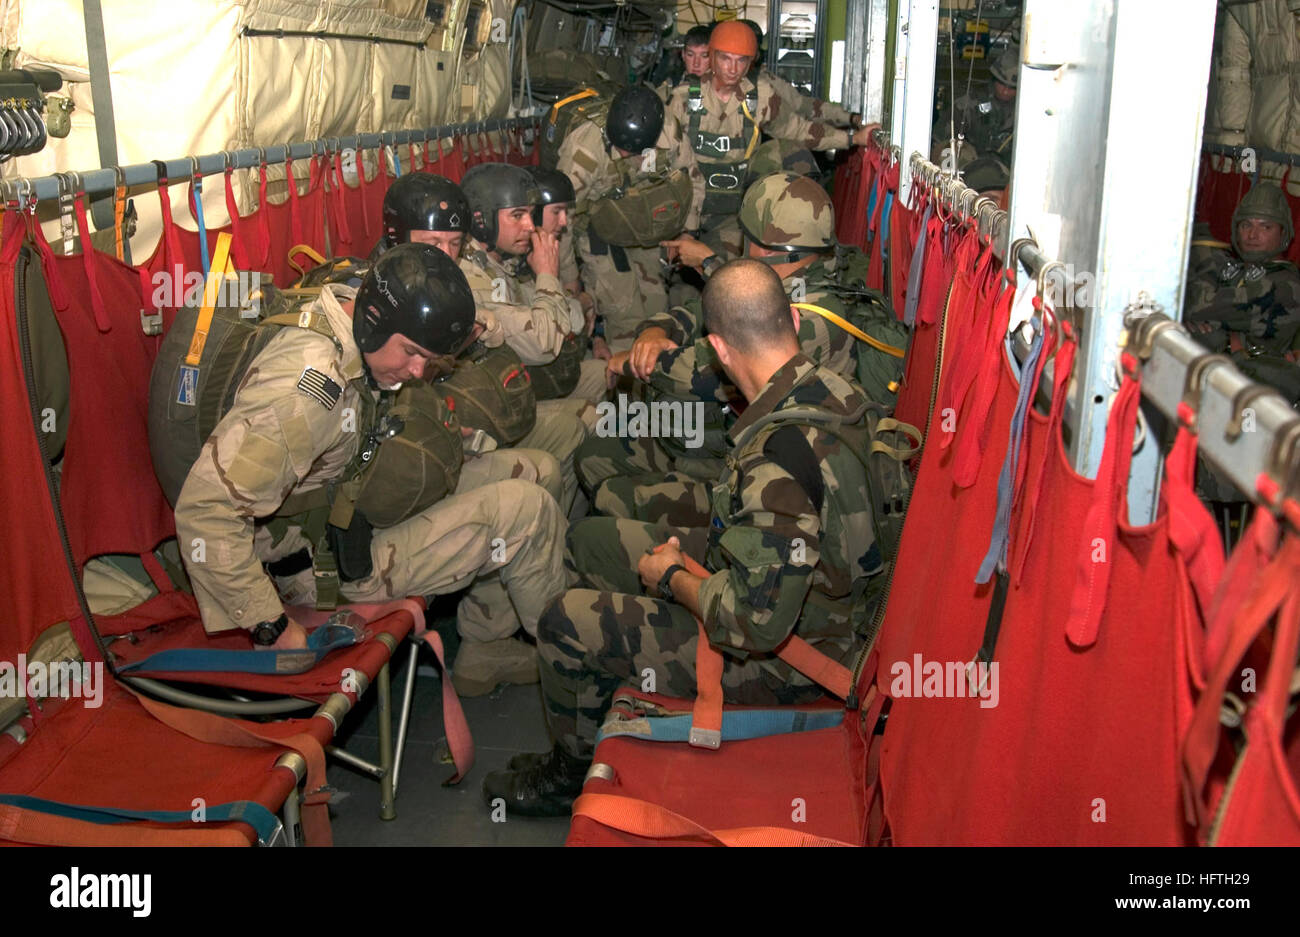 070308-N-3884F-040 CAMP LEMONIER, Djibouti (March 8, 2007) - Members from  the French Foreign Legion and U.S. services stationed at Camp Lemonier  prepare to jump from a plane while training on equipment familiarization